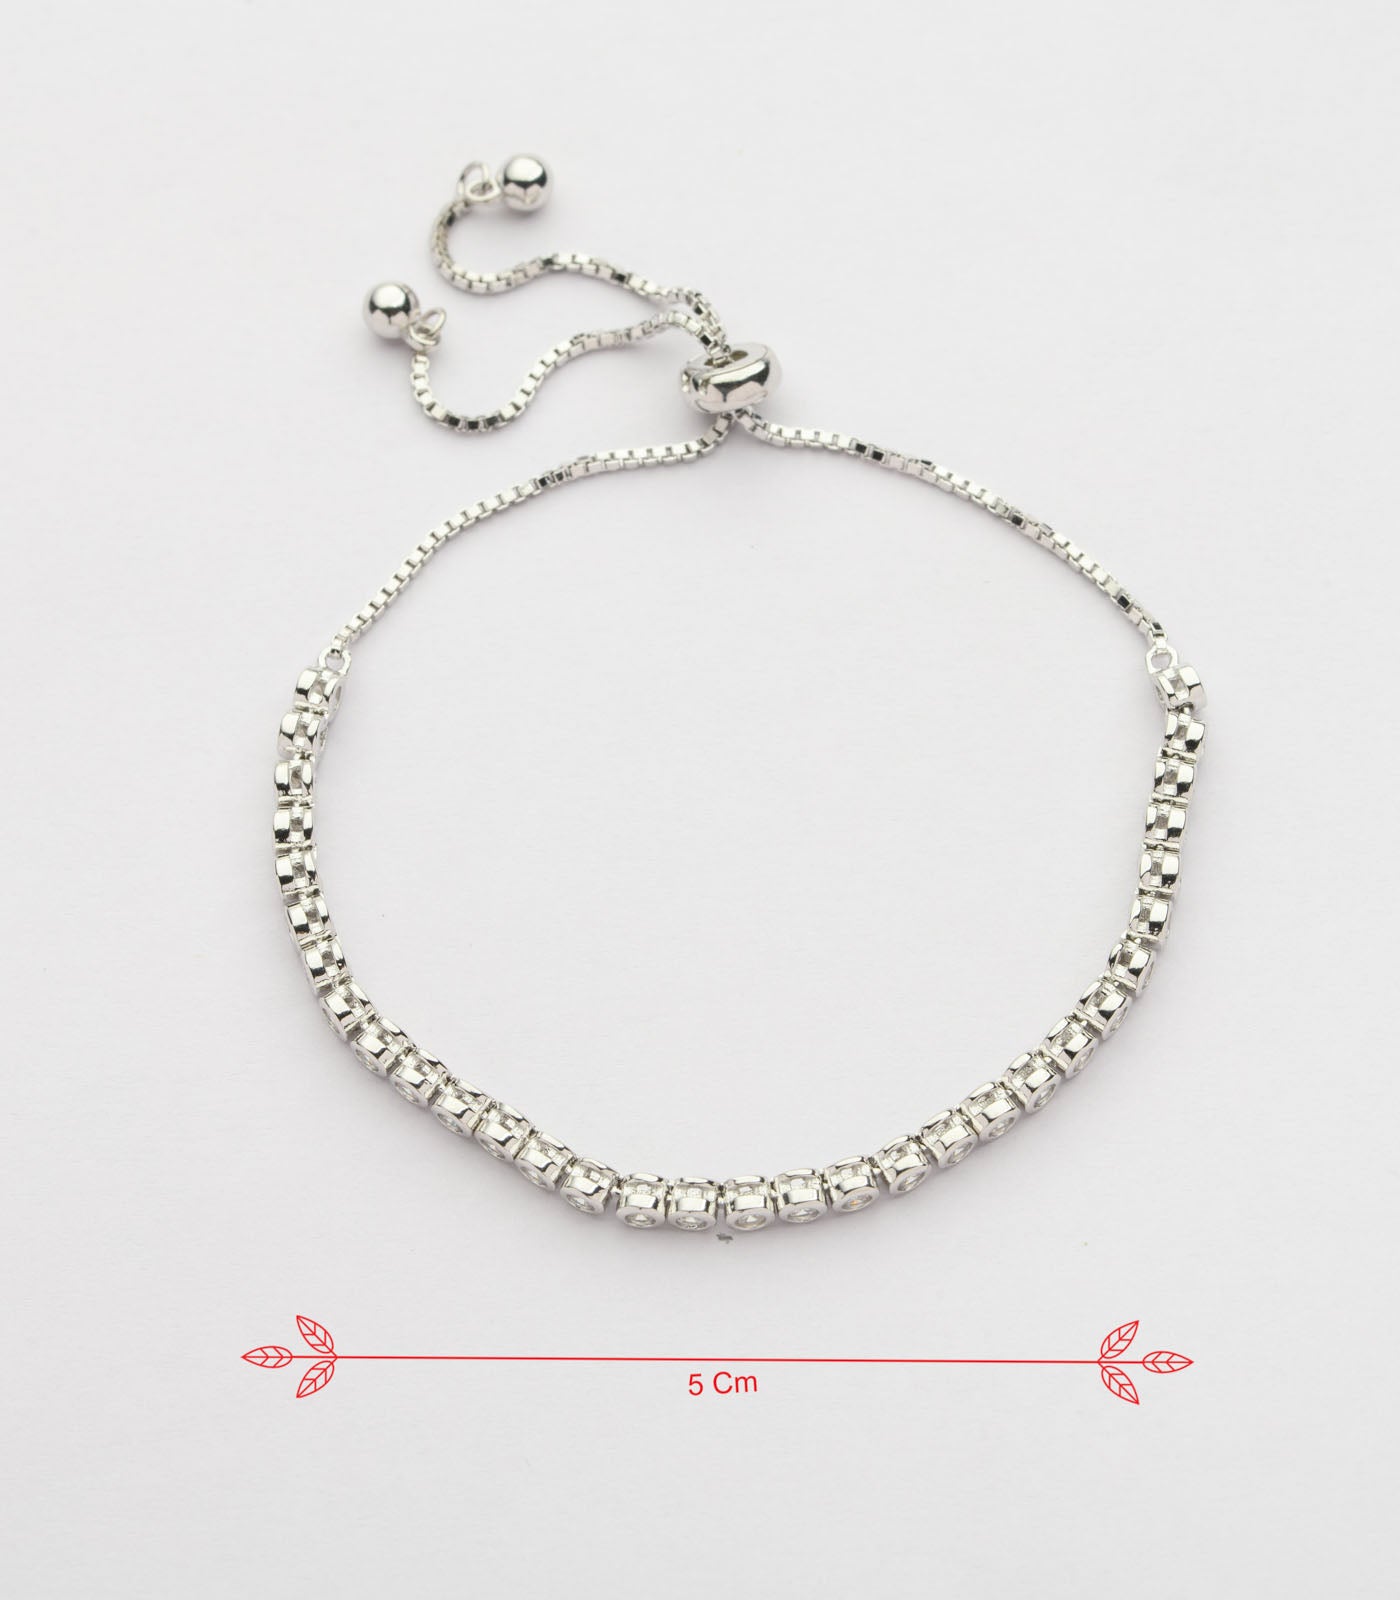 Stone Sequence Bracelet (Silver)